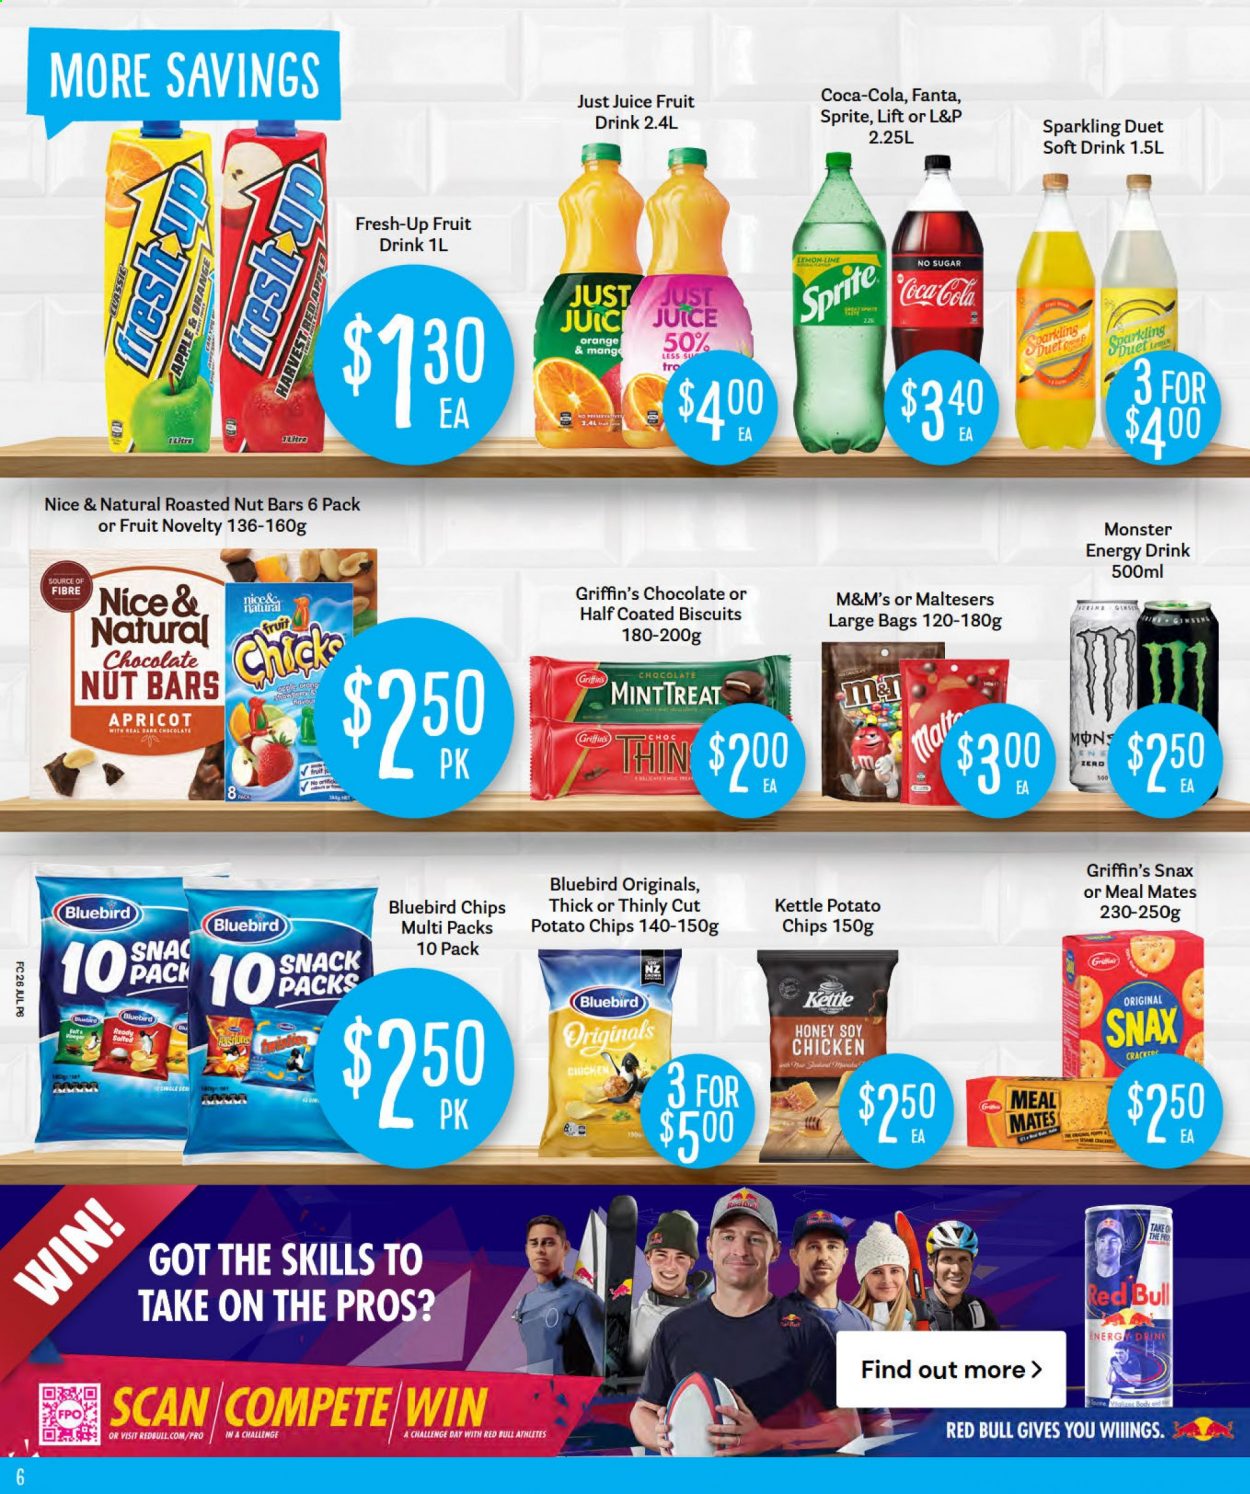 thumbnail - Fresh Choice mailer - 26.07.2021 - 01.08.2021 - Sales products - oranges, chocolate, snack, M&M's, biscuit, dark chocolate, Maltesers, Griffin's, potato chips, chips, Bluebird, nut bar, honey, Coca-Cola, Sprite, juice, energy drink, Monster, Fanta, fruit drink, soft drink, Red Bull, L&P, Monster Energy. Page 6.